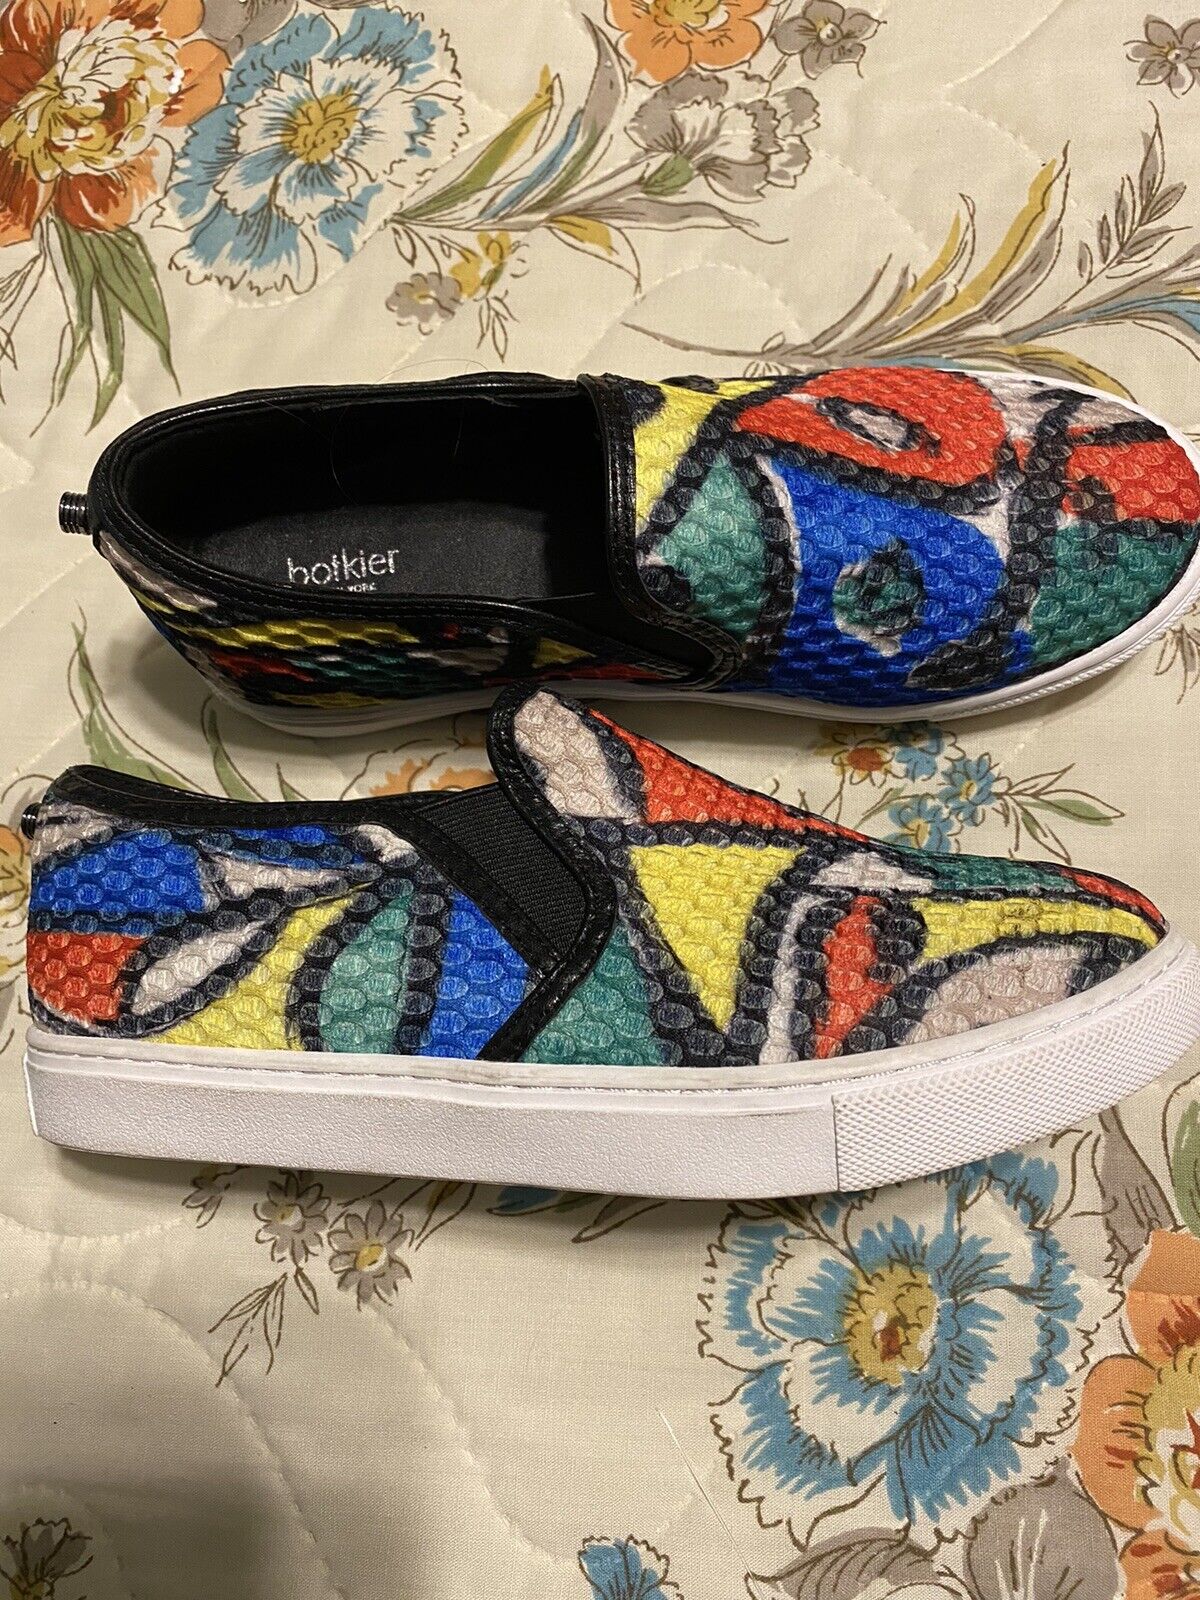 New Botkier Women’s Size 7.5  Low Top Pull On Fashion Sneakers, Multicolored